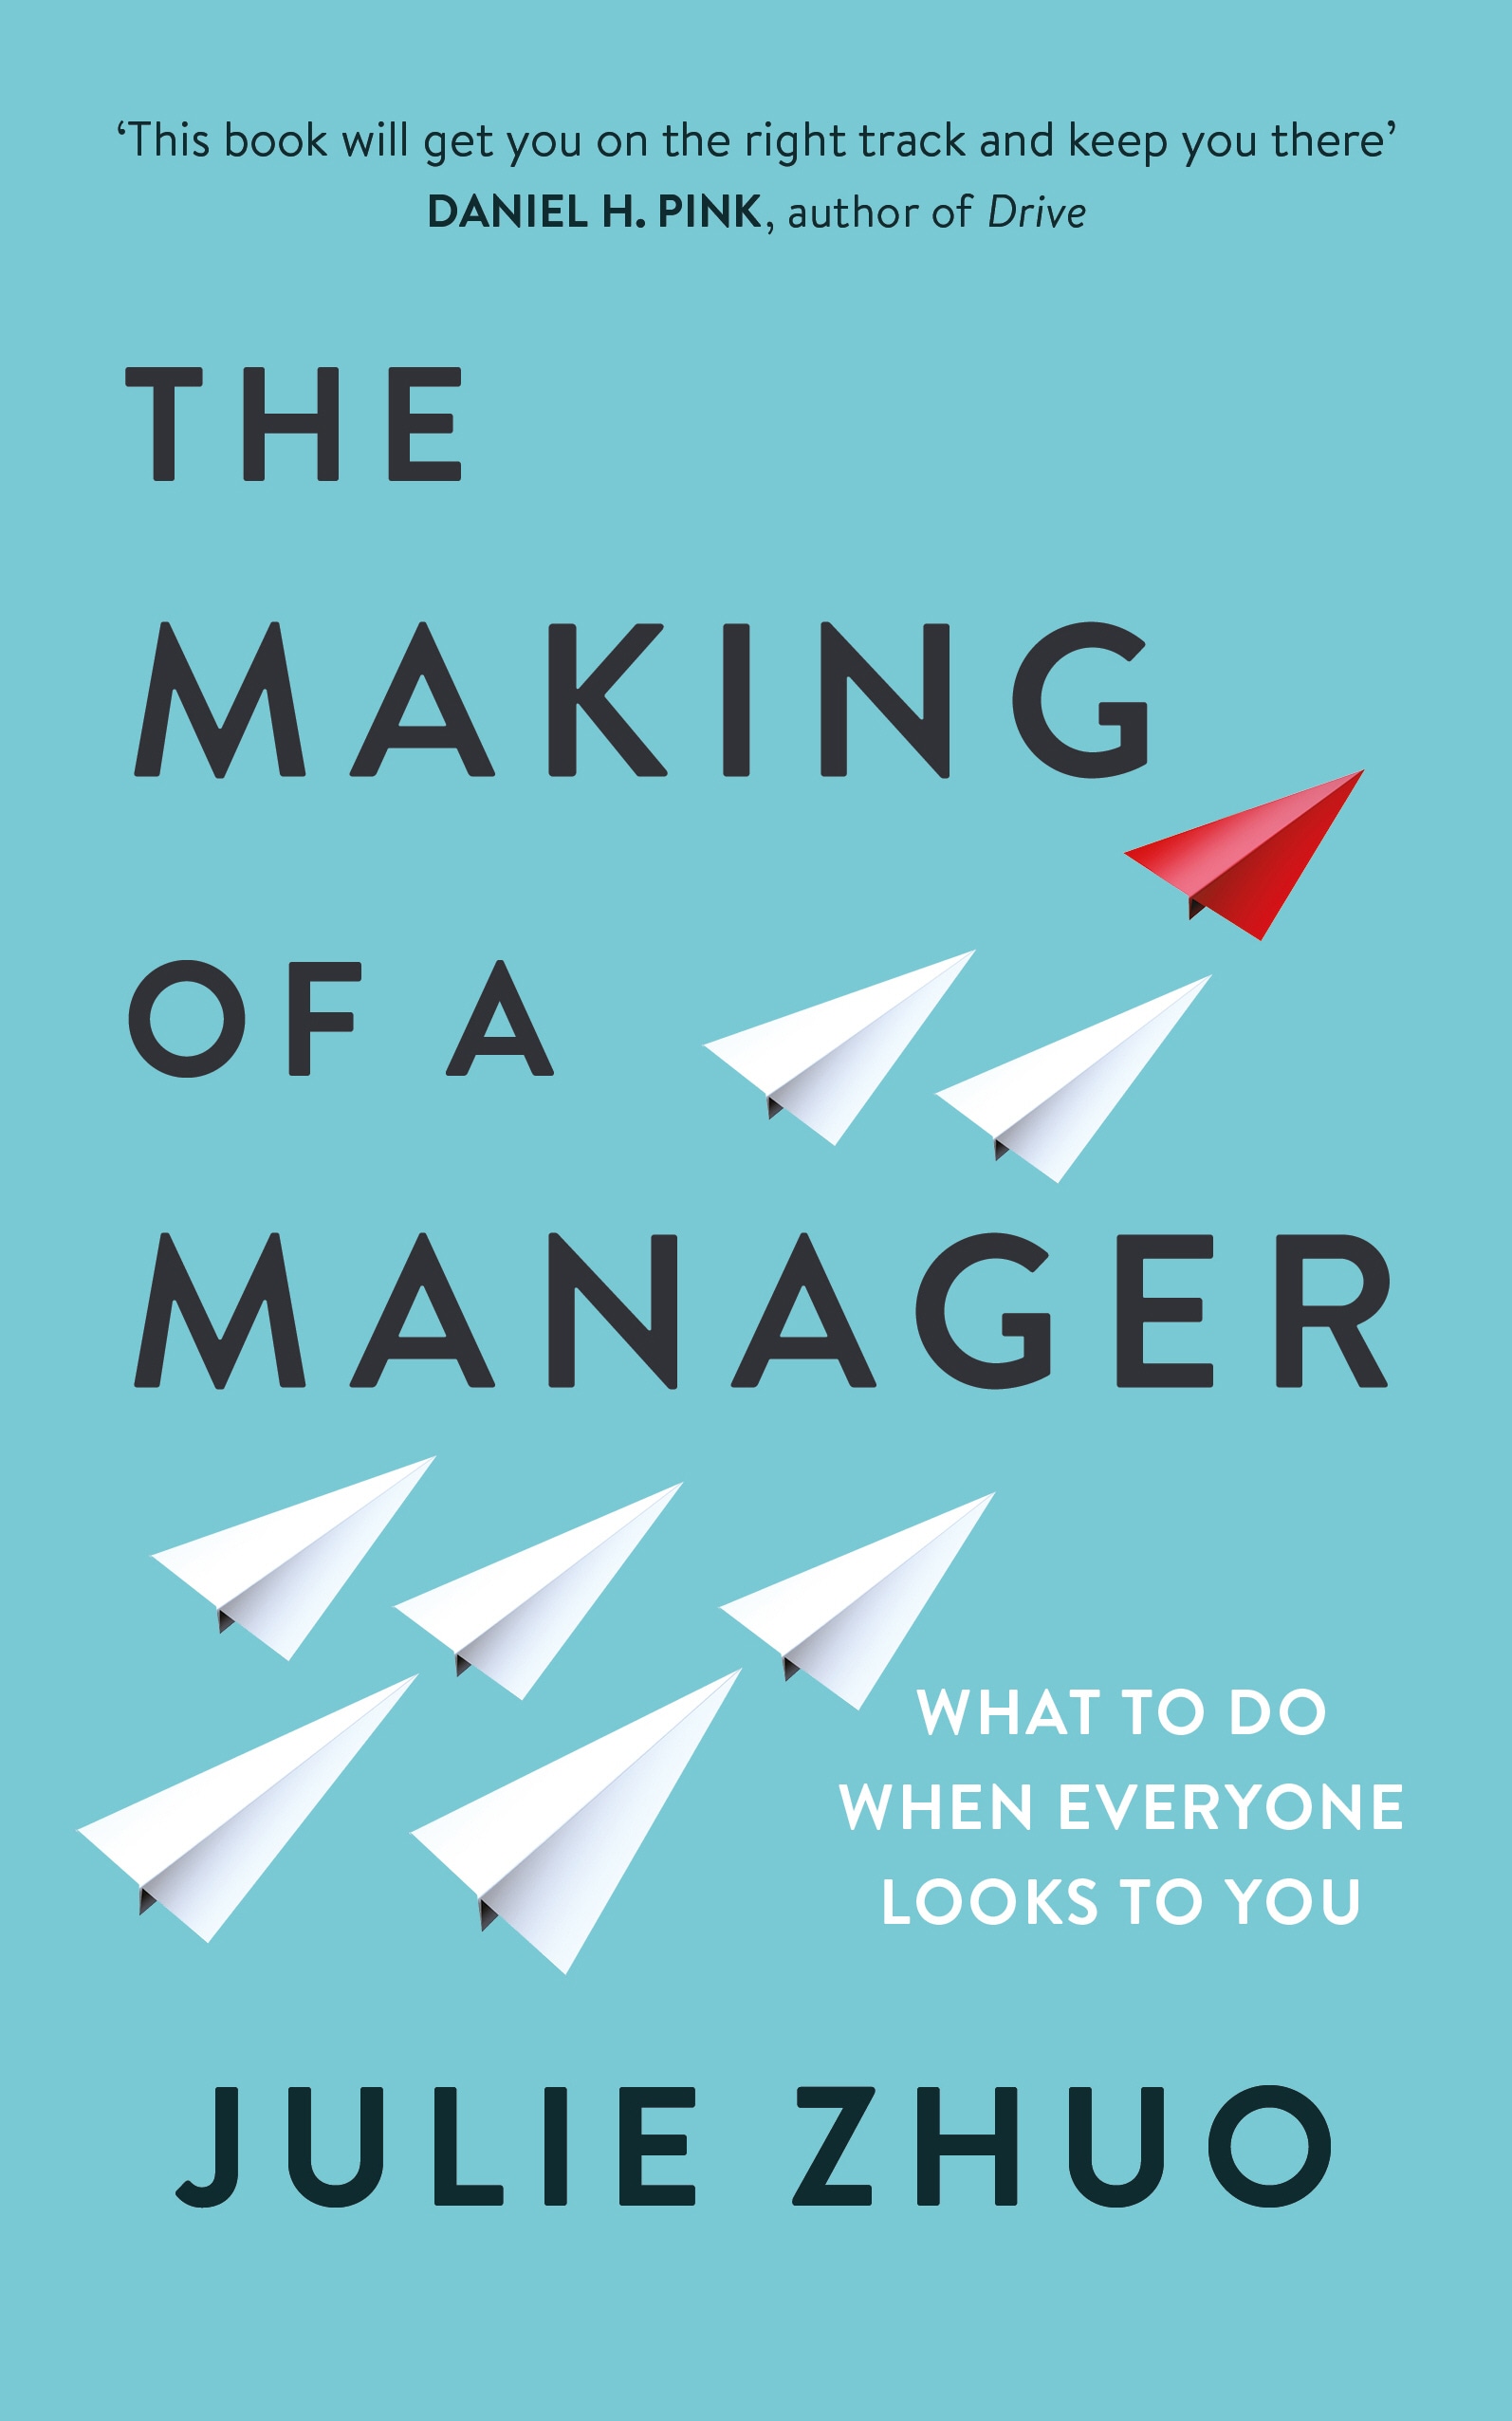 Book “The Making of a Manager” by Julie Zhuo — March 21, 2019